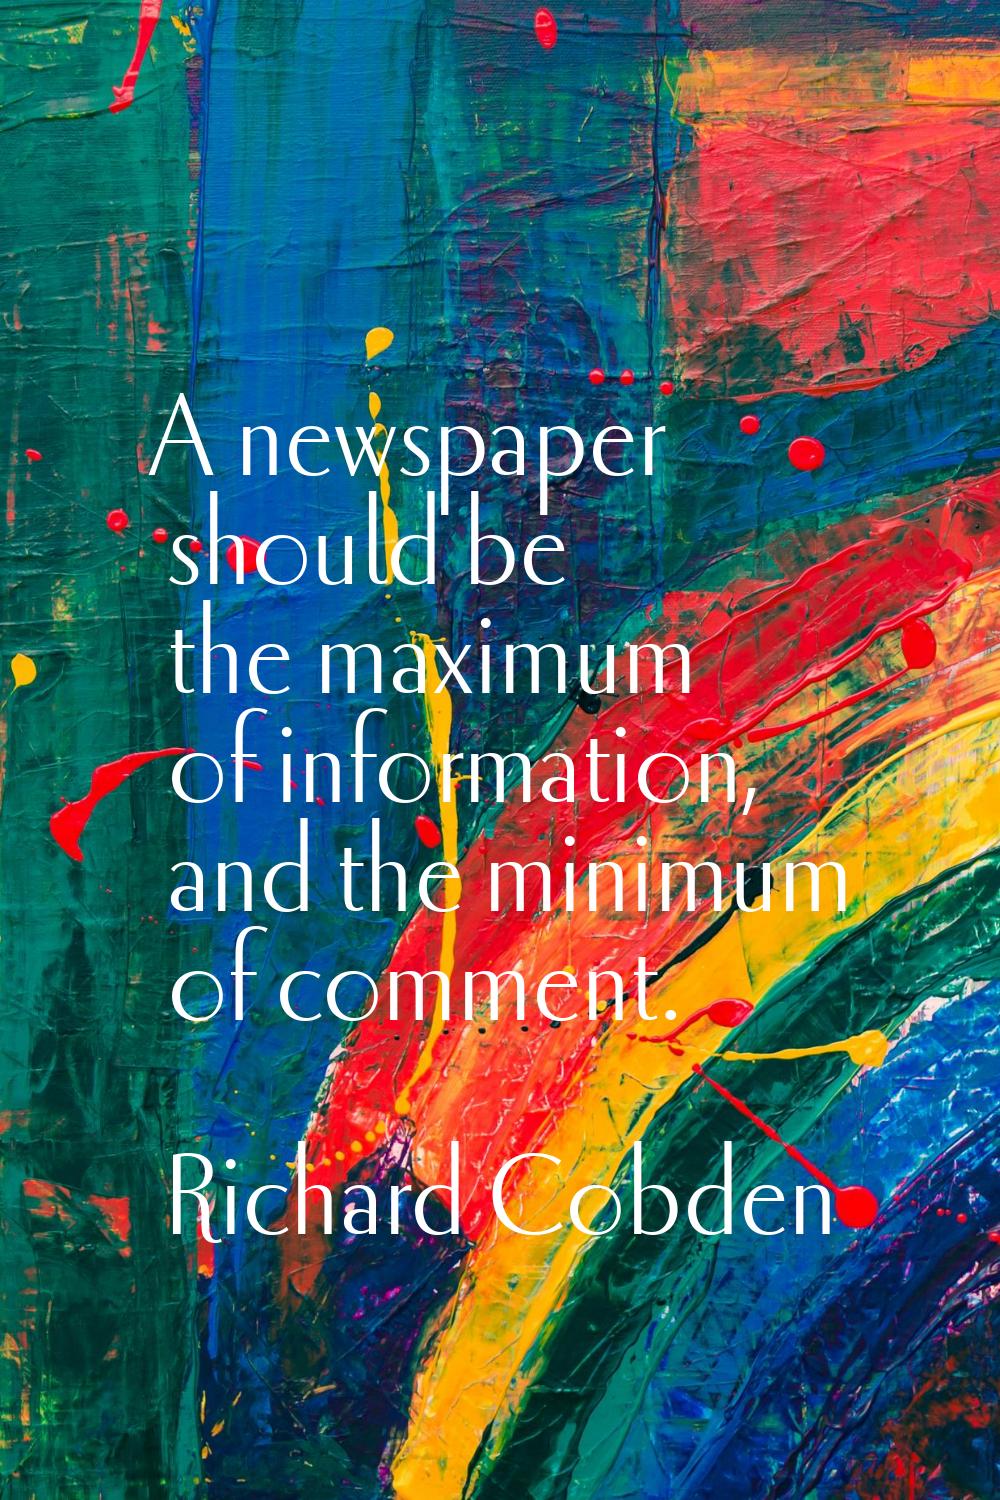 A newspaper should be the maximum of information, and the minimum of comment.